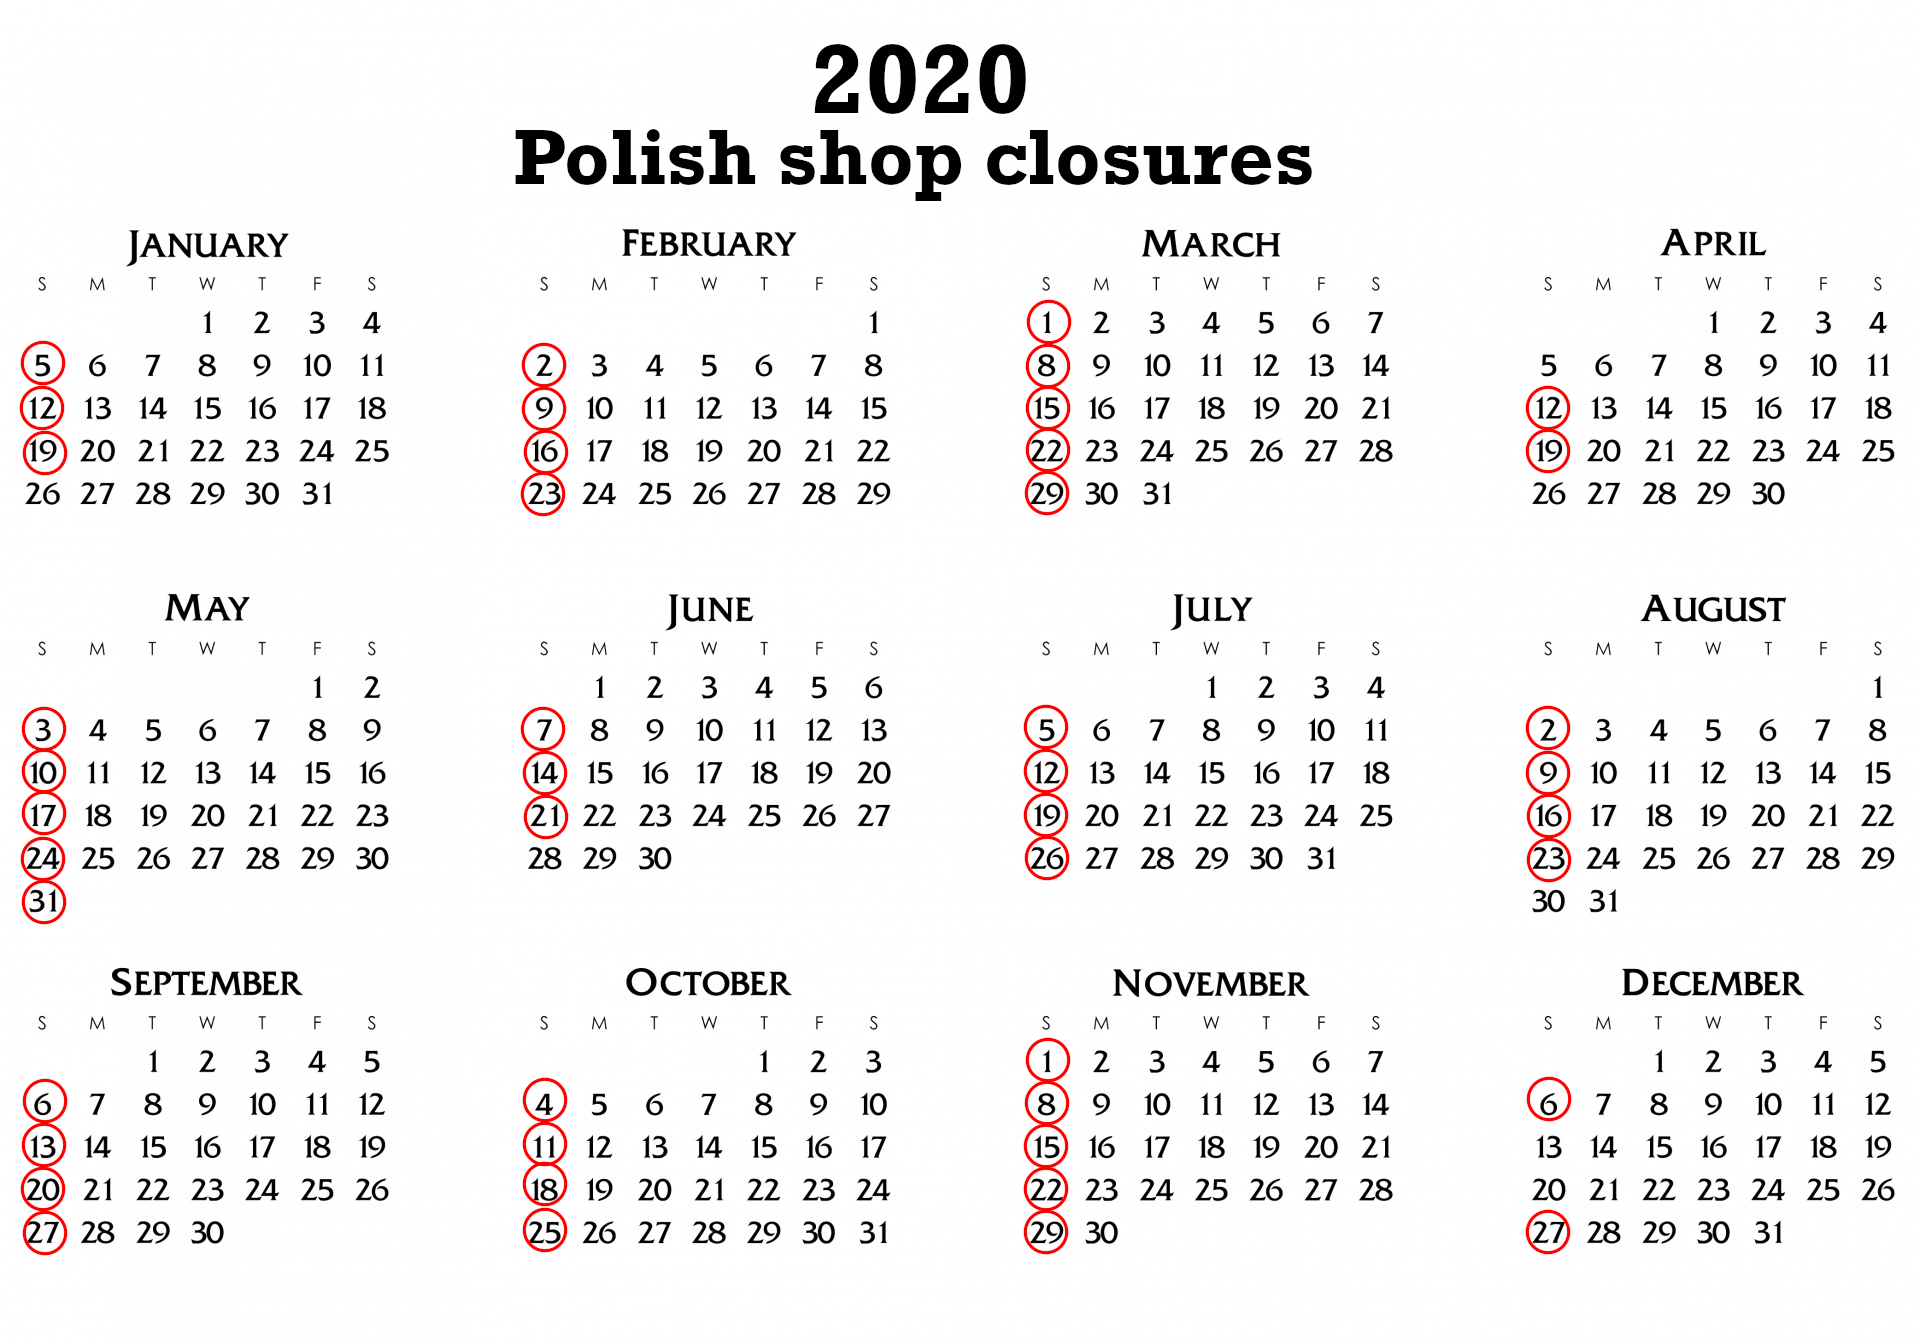 2020 Sunday trading in Poland: When will the shops be open? | The Krakow  Post